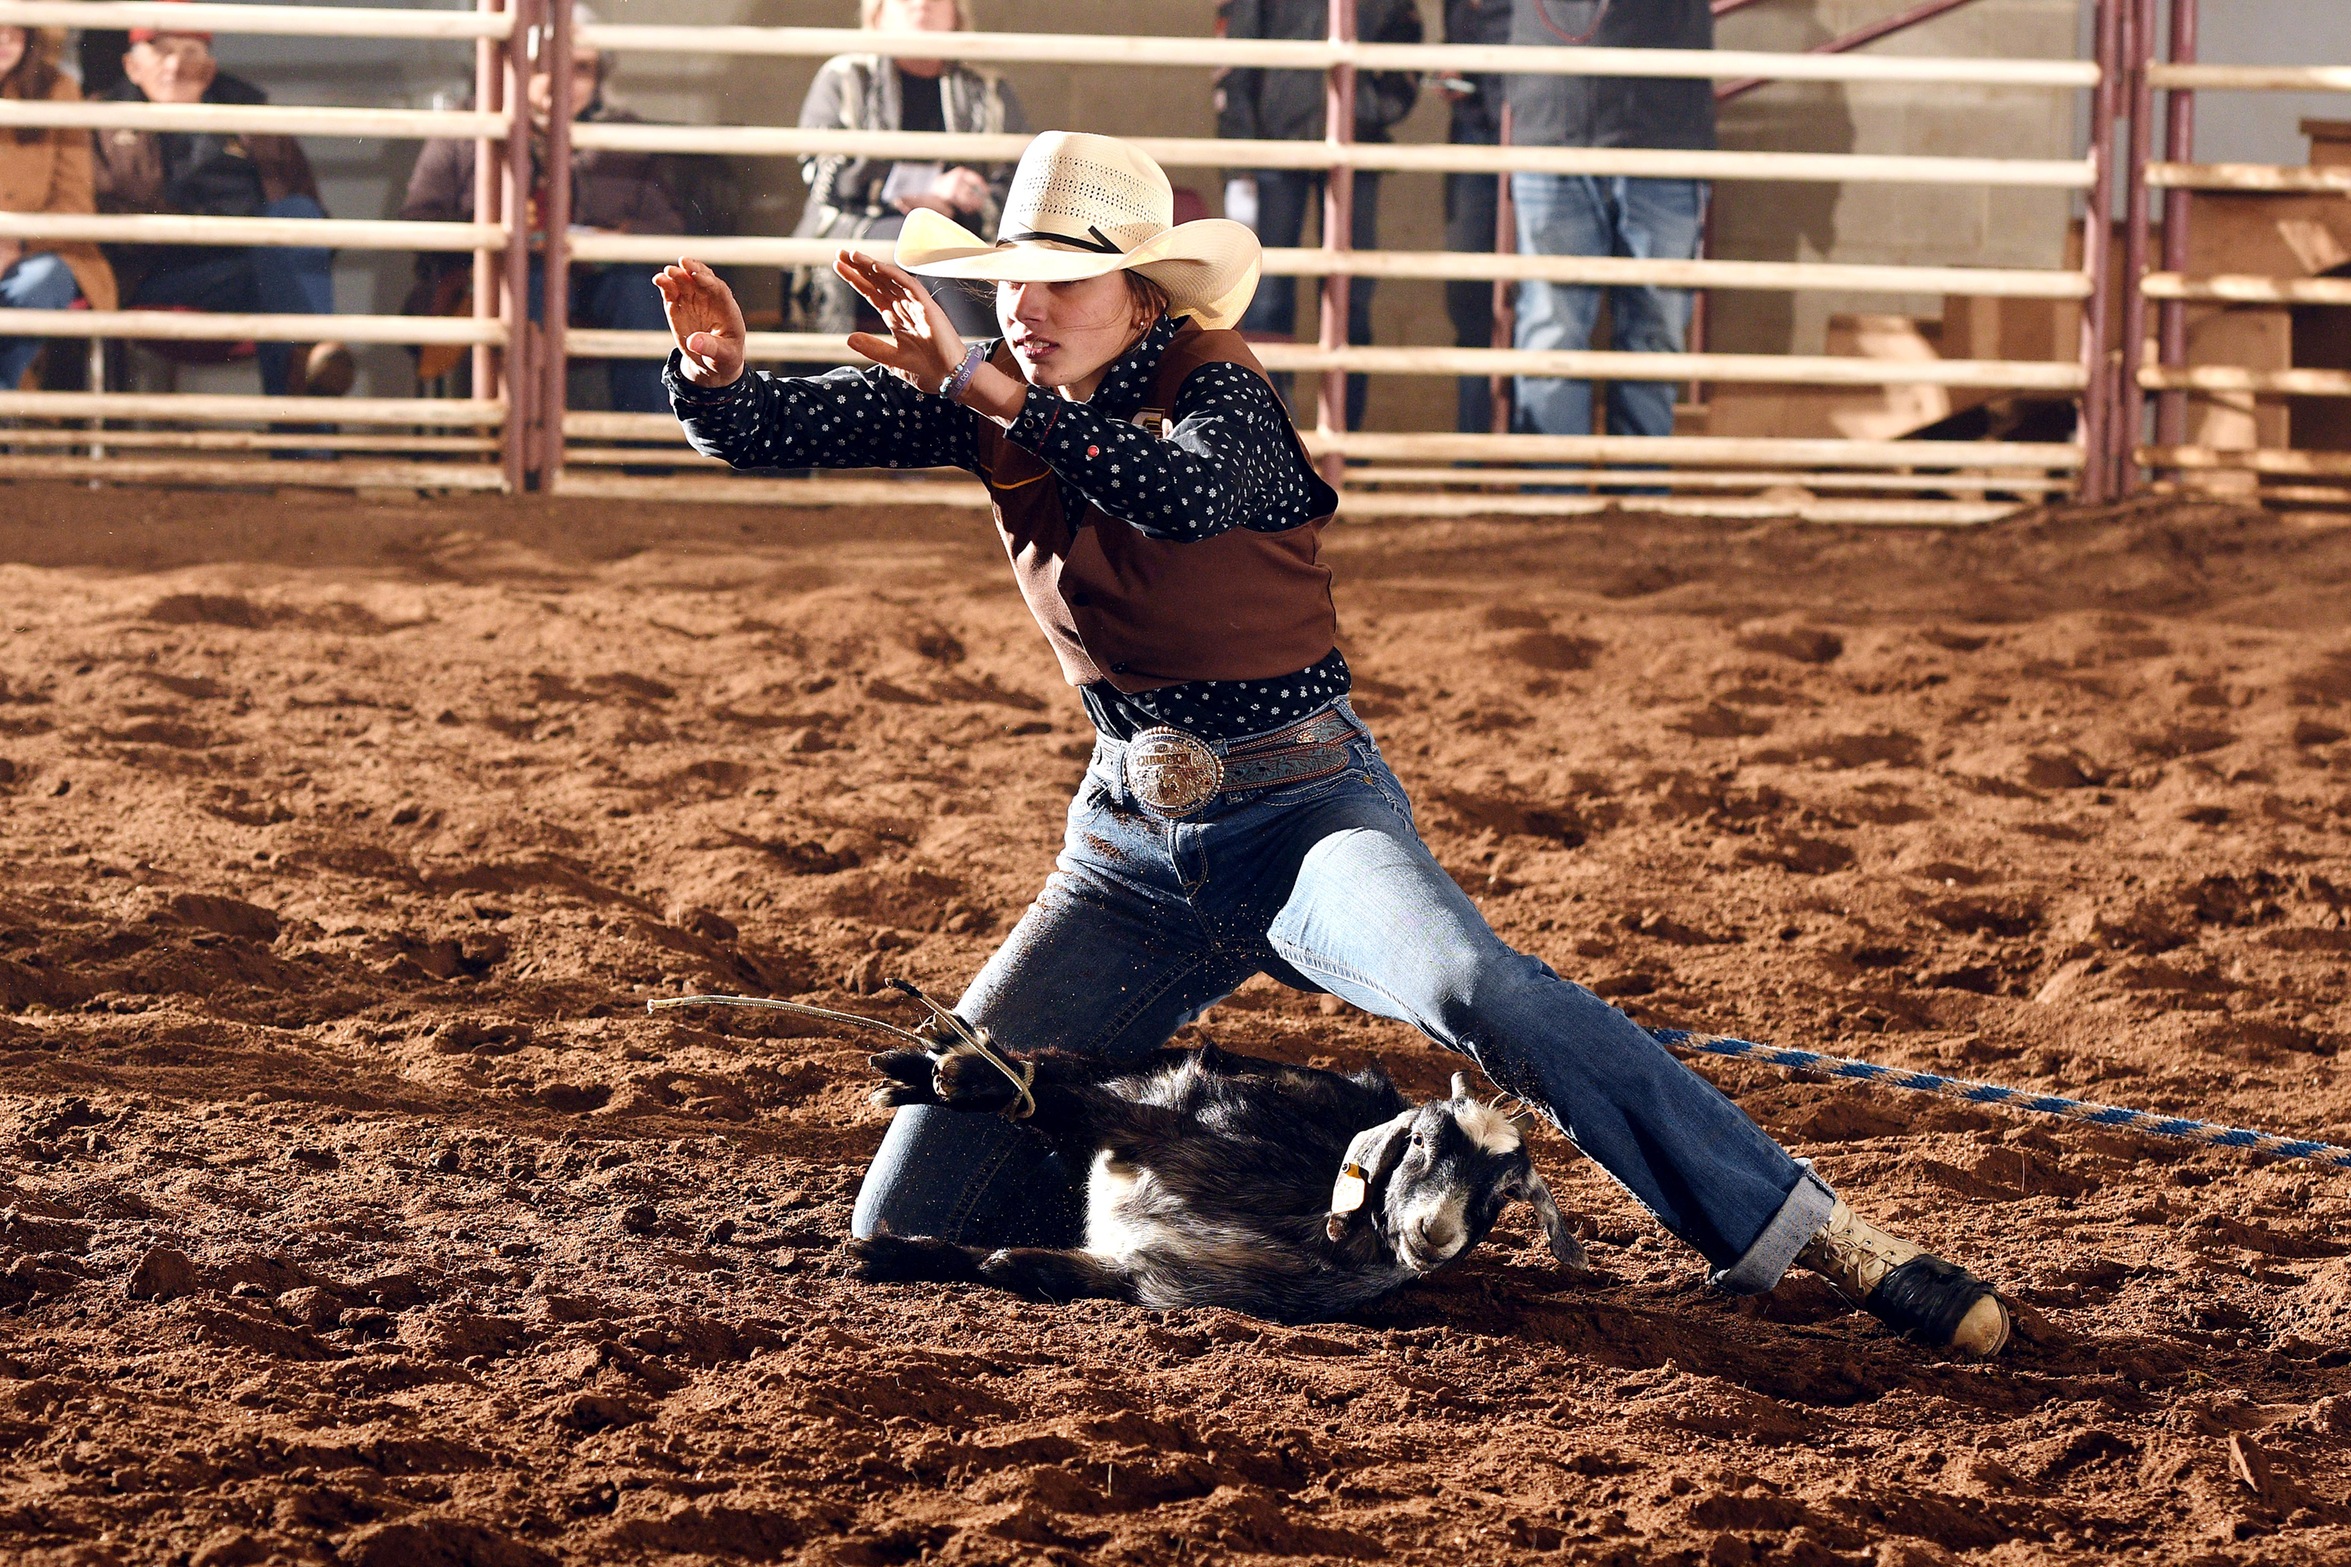 Rodeo teams compete in Fort Scott